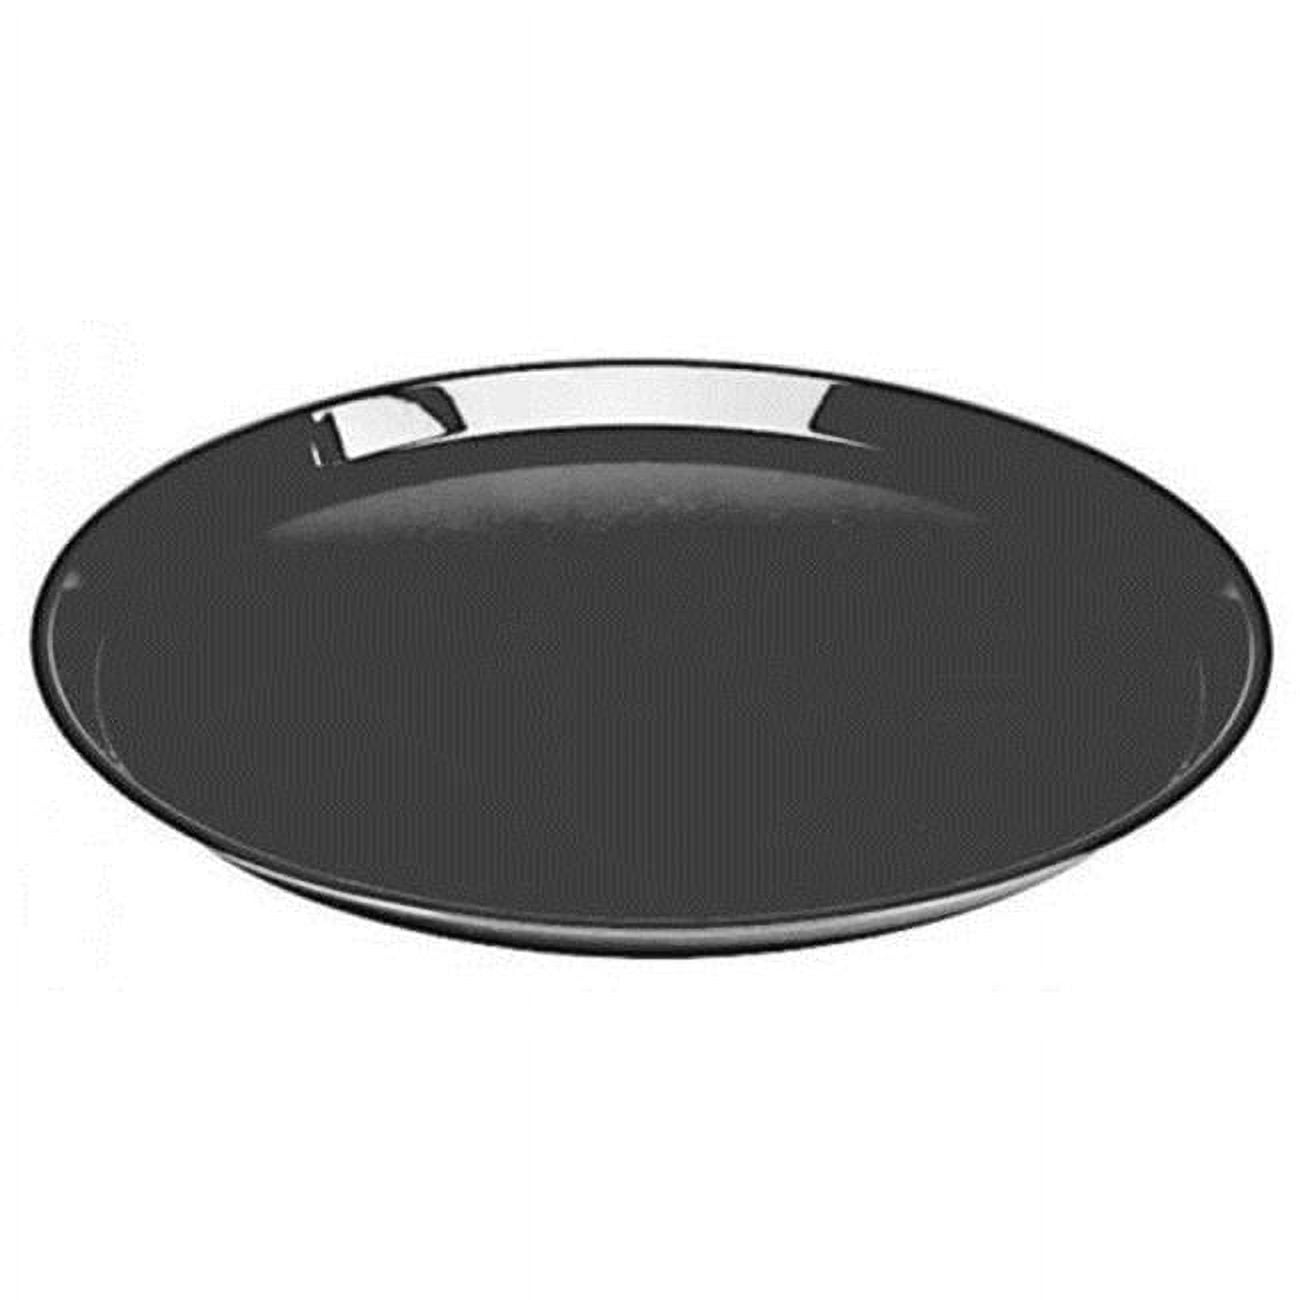 Stak12rb25 Cpc 12 Catering Tray